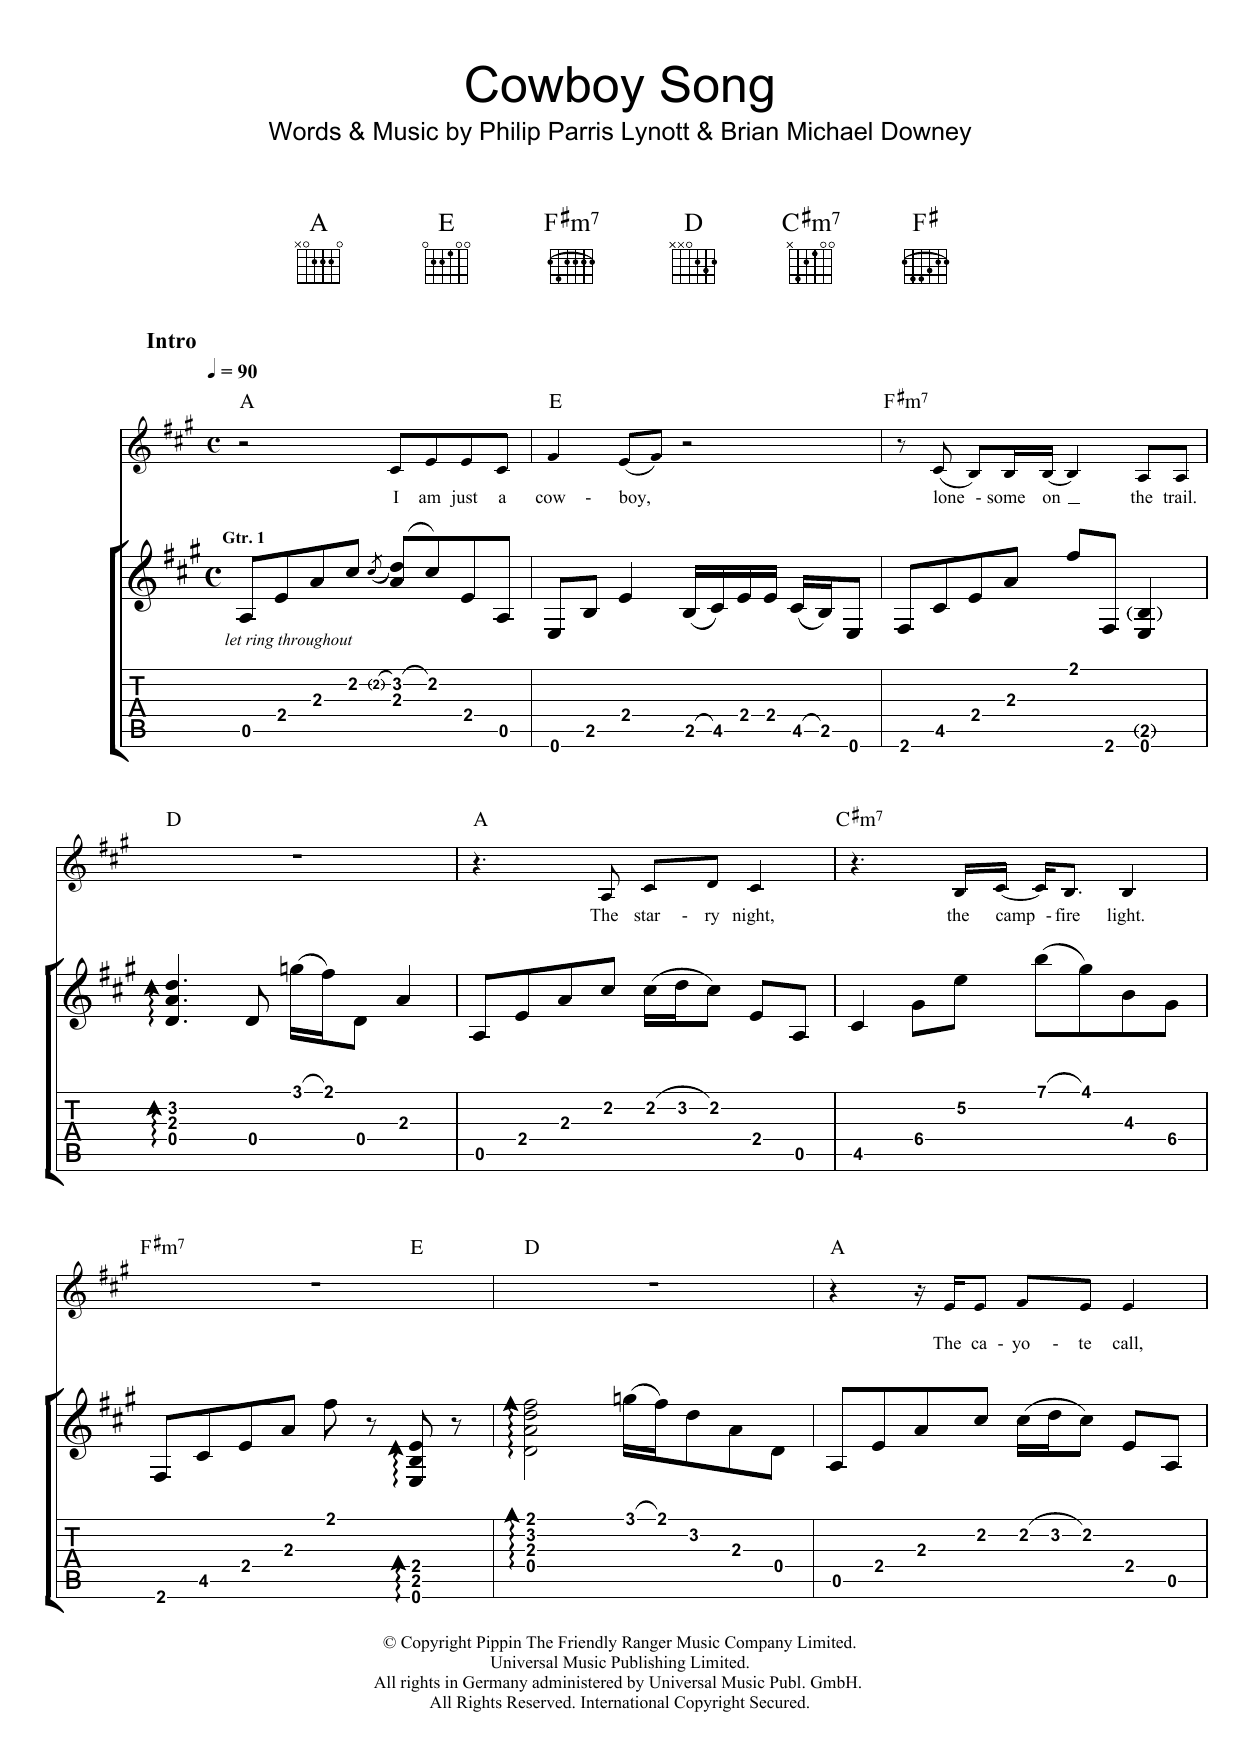 Download Thin Lizzy Cowboy Song Sheet Music